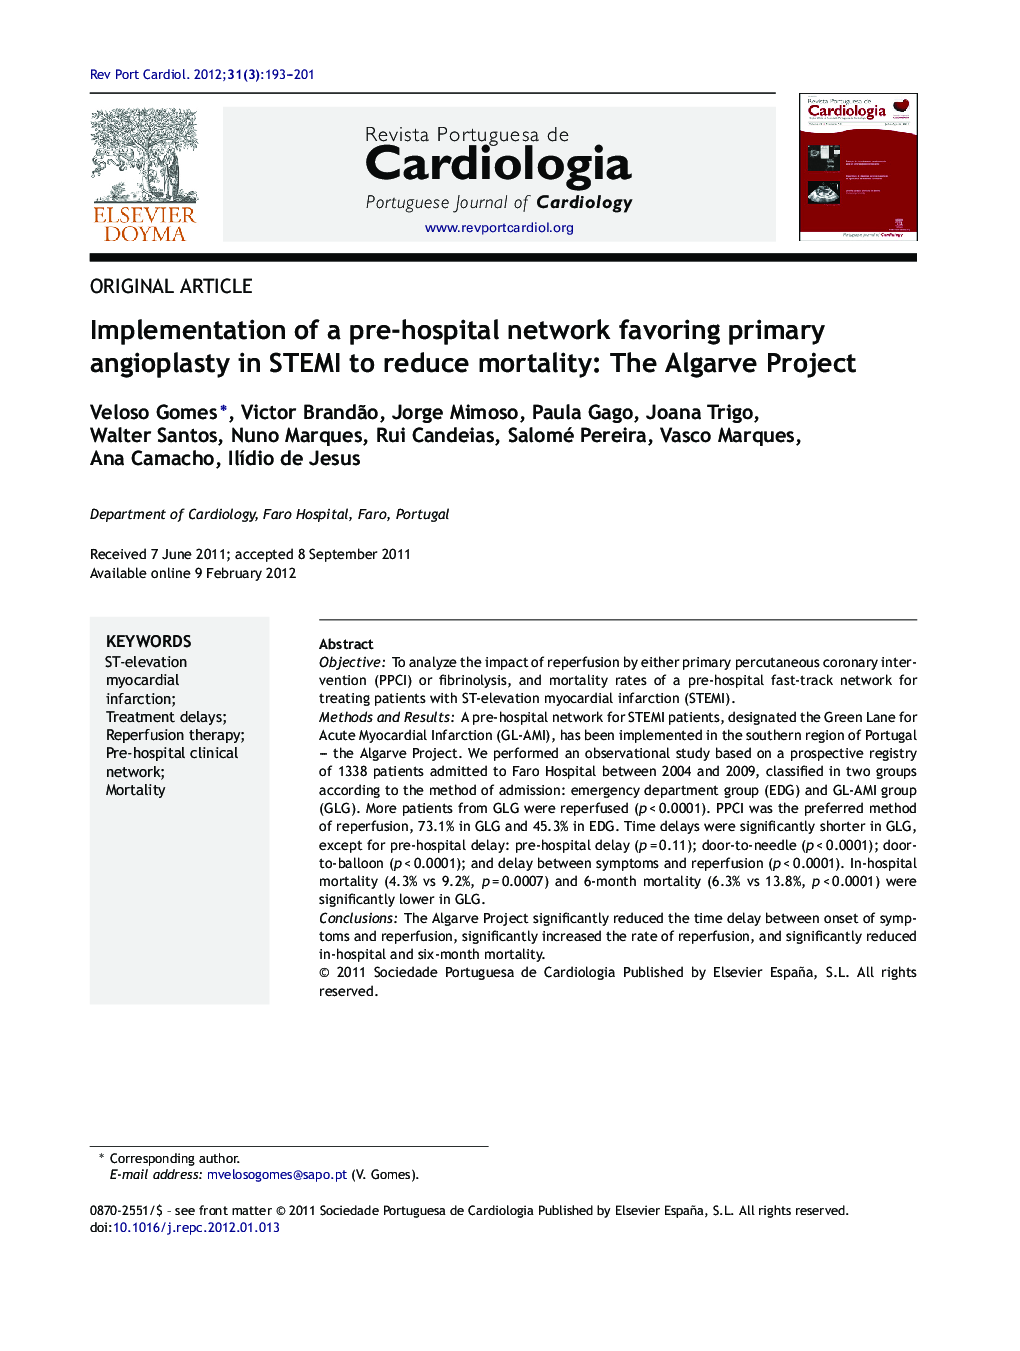 Implementation of a pre-hospital network favoring primary angioplasty in STEMI to reduce mortality: The Algarve Project